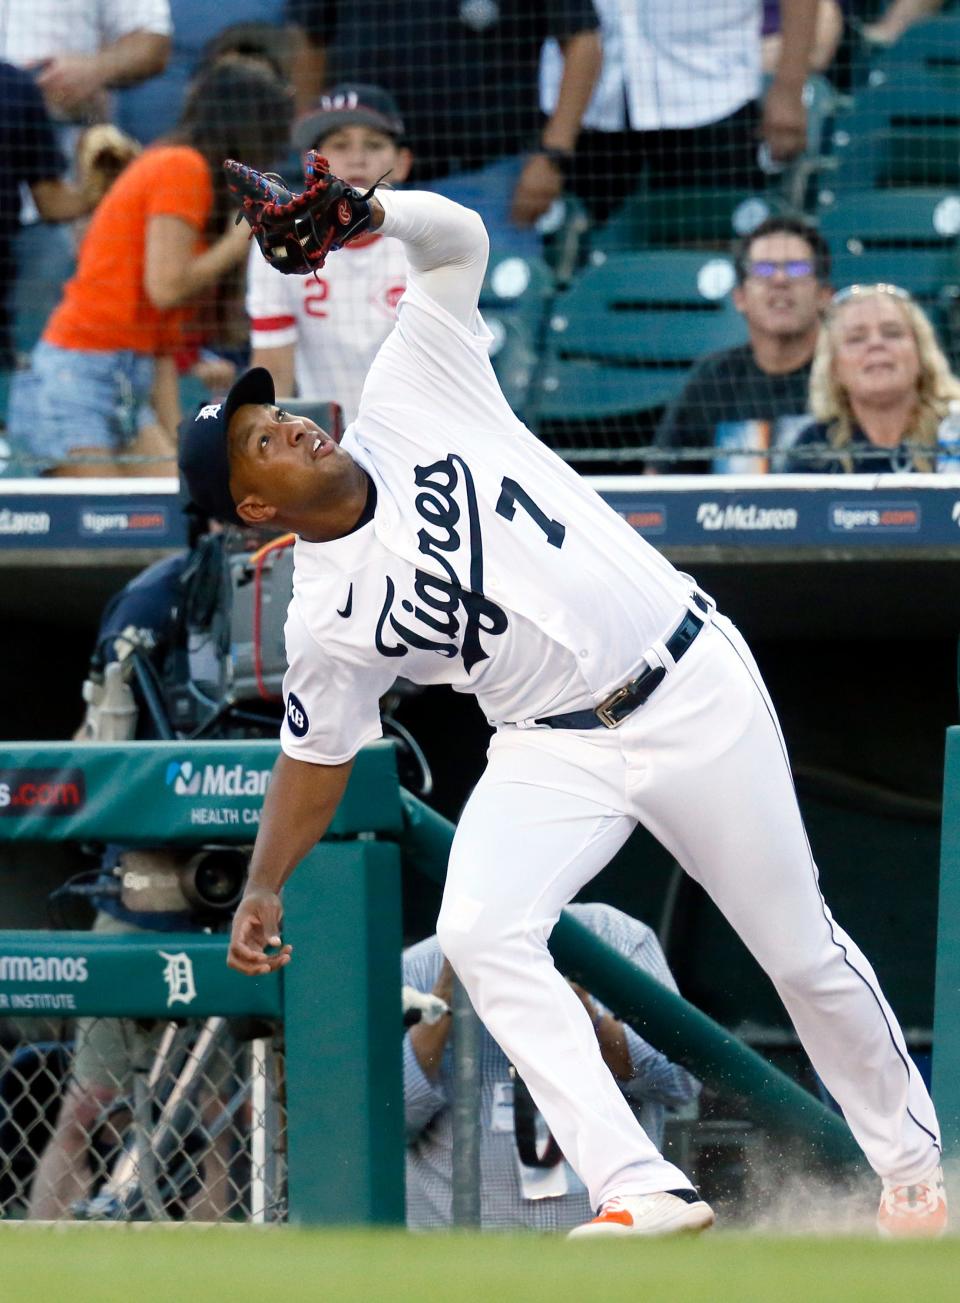 First baseman Jonathan Schoop of the Detroit Tigers catches a foul fly ball hit by Mike Trout of the Los Angeles Angels during the first inning at Comerica Park in Detroit on Friday, Aug. 19, 2022.